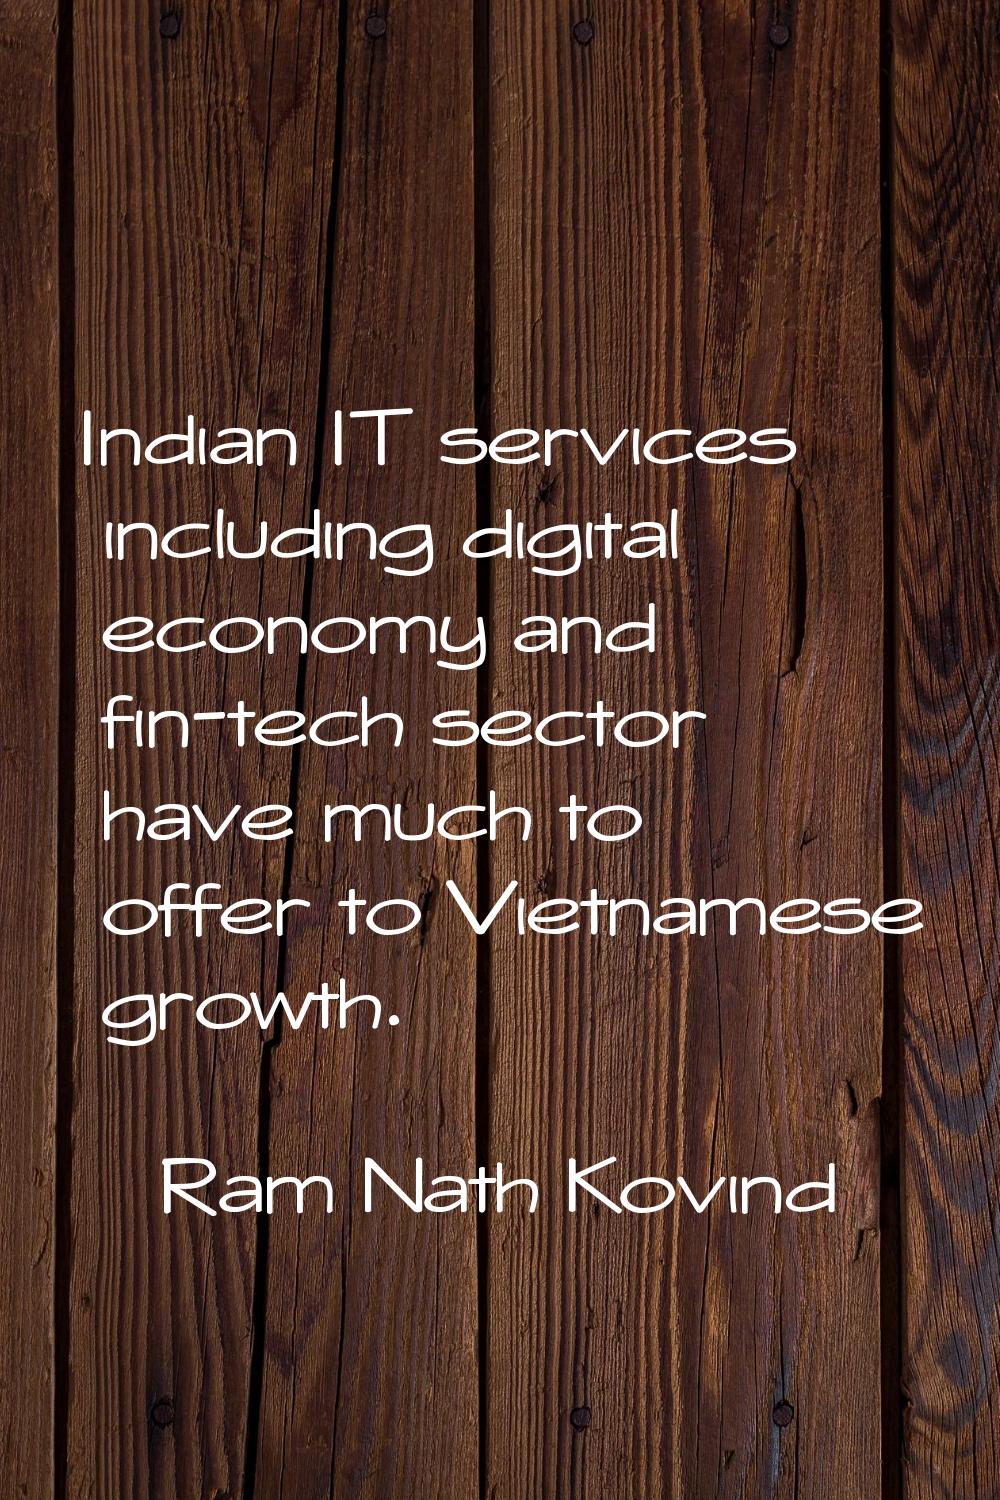 Indian IT services including digital economy and fin-tech sector have much to offer to Vietnamese g